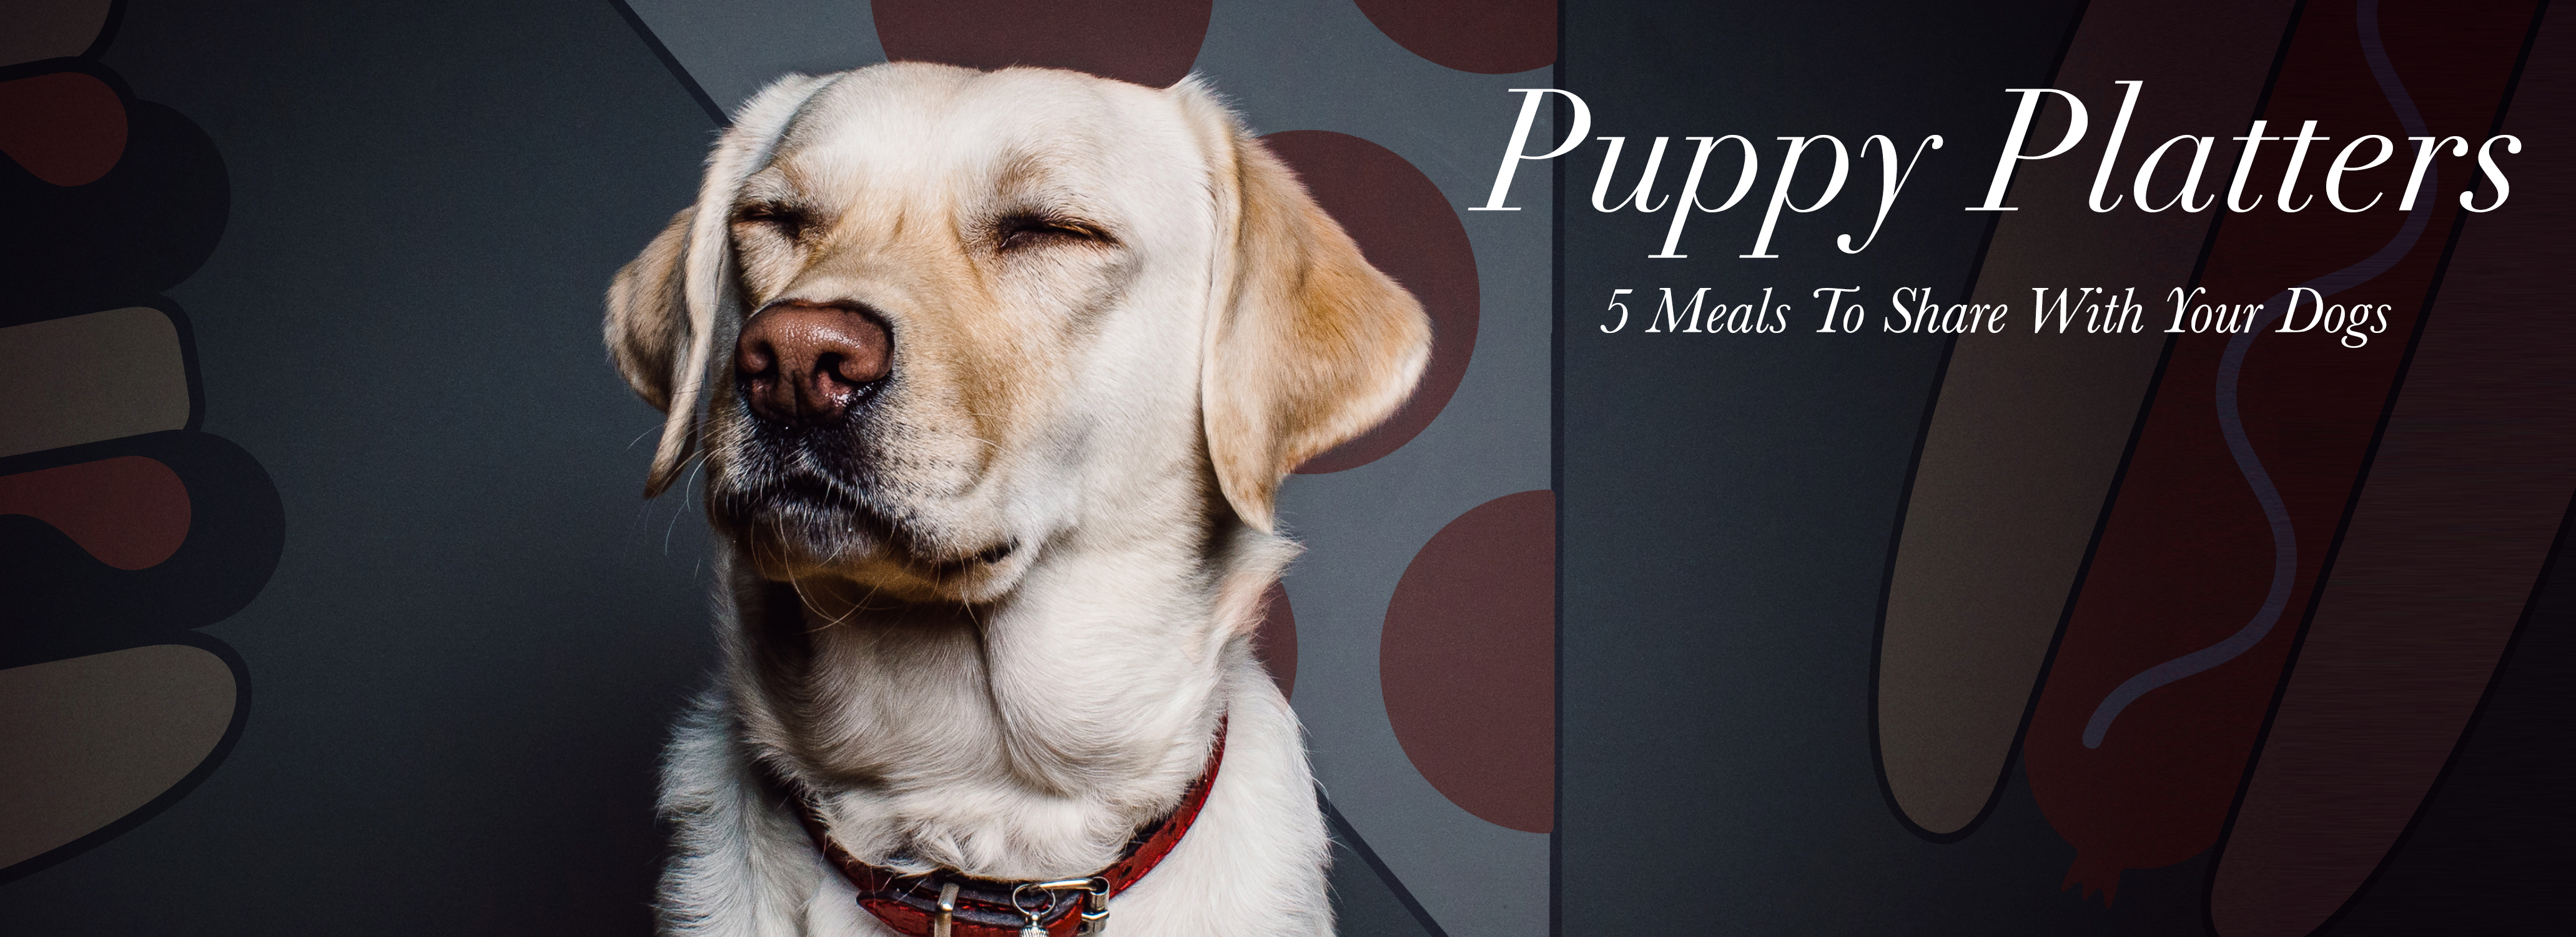 Puppy Platters: 5 Meals To Share With Your Dogs